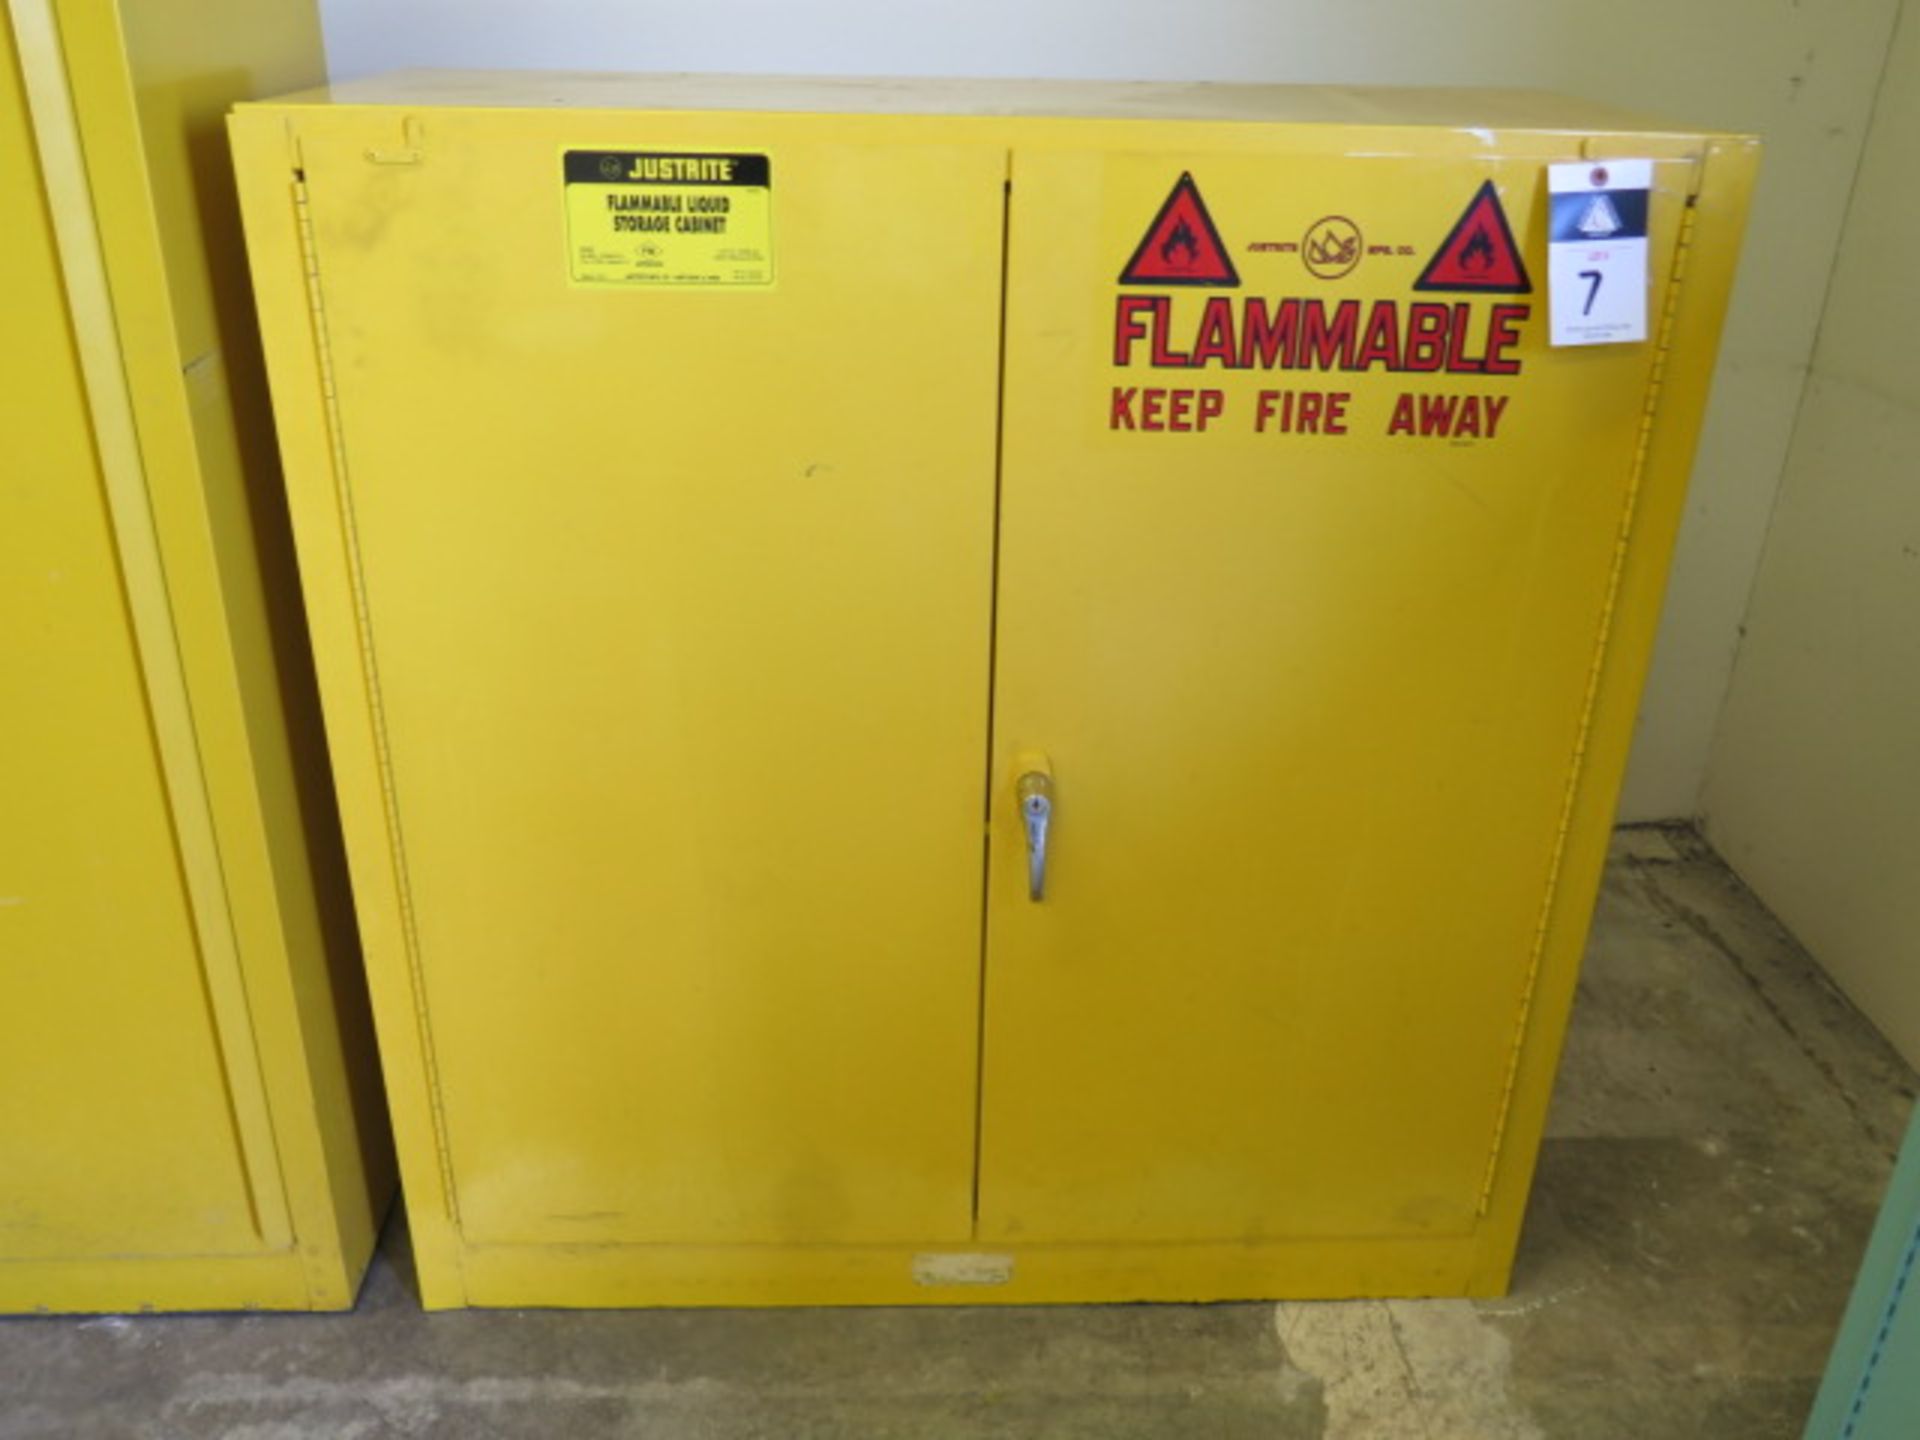 Justrite Flammables Storage Cabinet (SOLD AS-IS - NO WARRANTY)